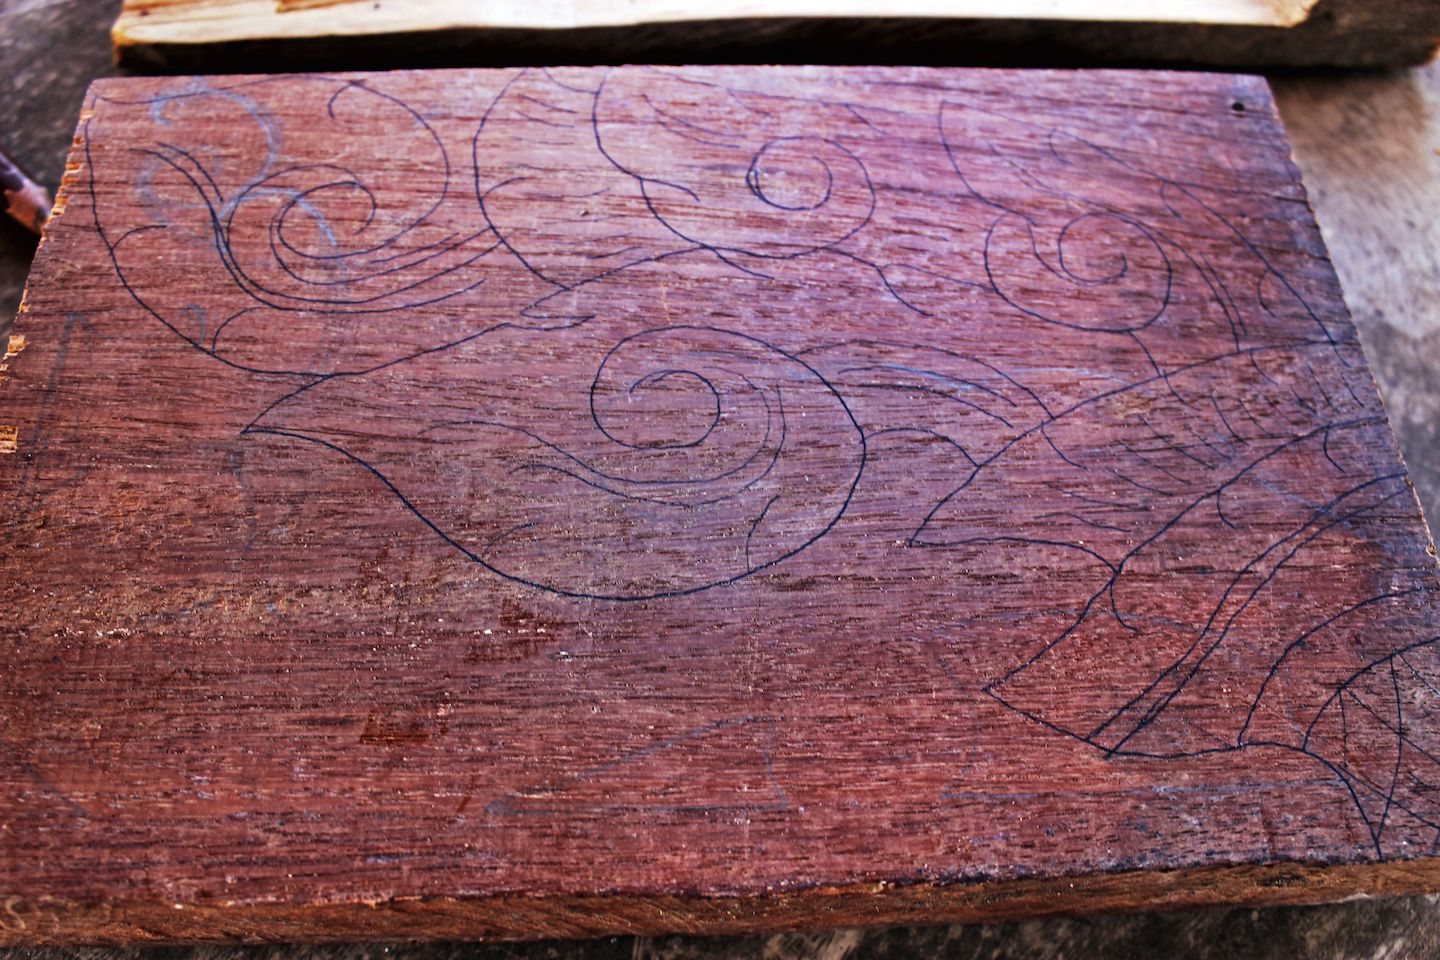 Julie's drawing on the wood, Vientiane, Laos